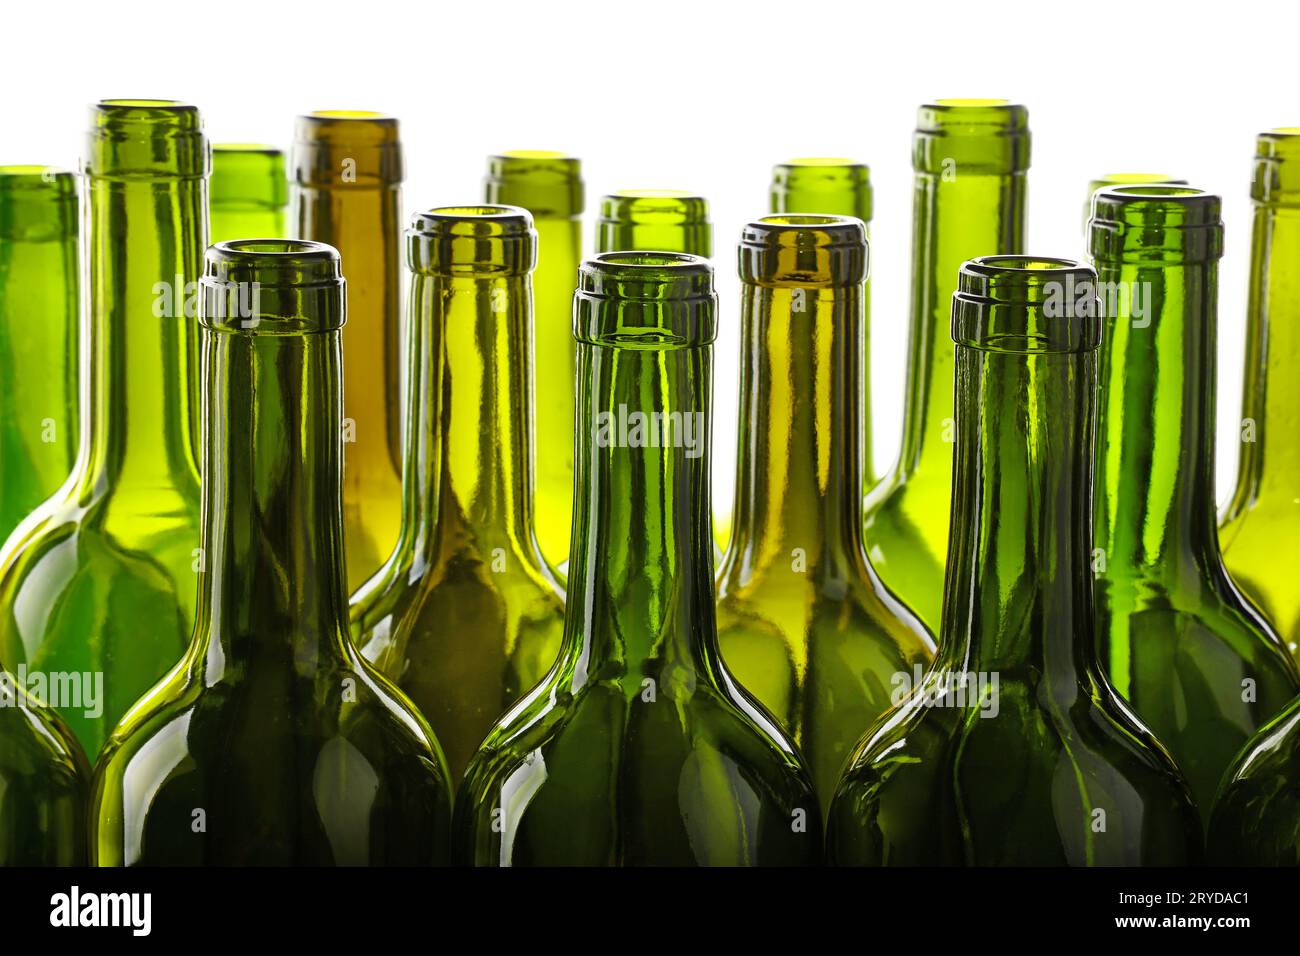 Empty green glass wine bottles isolated on white Stock Photo